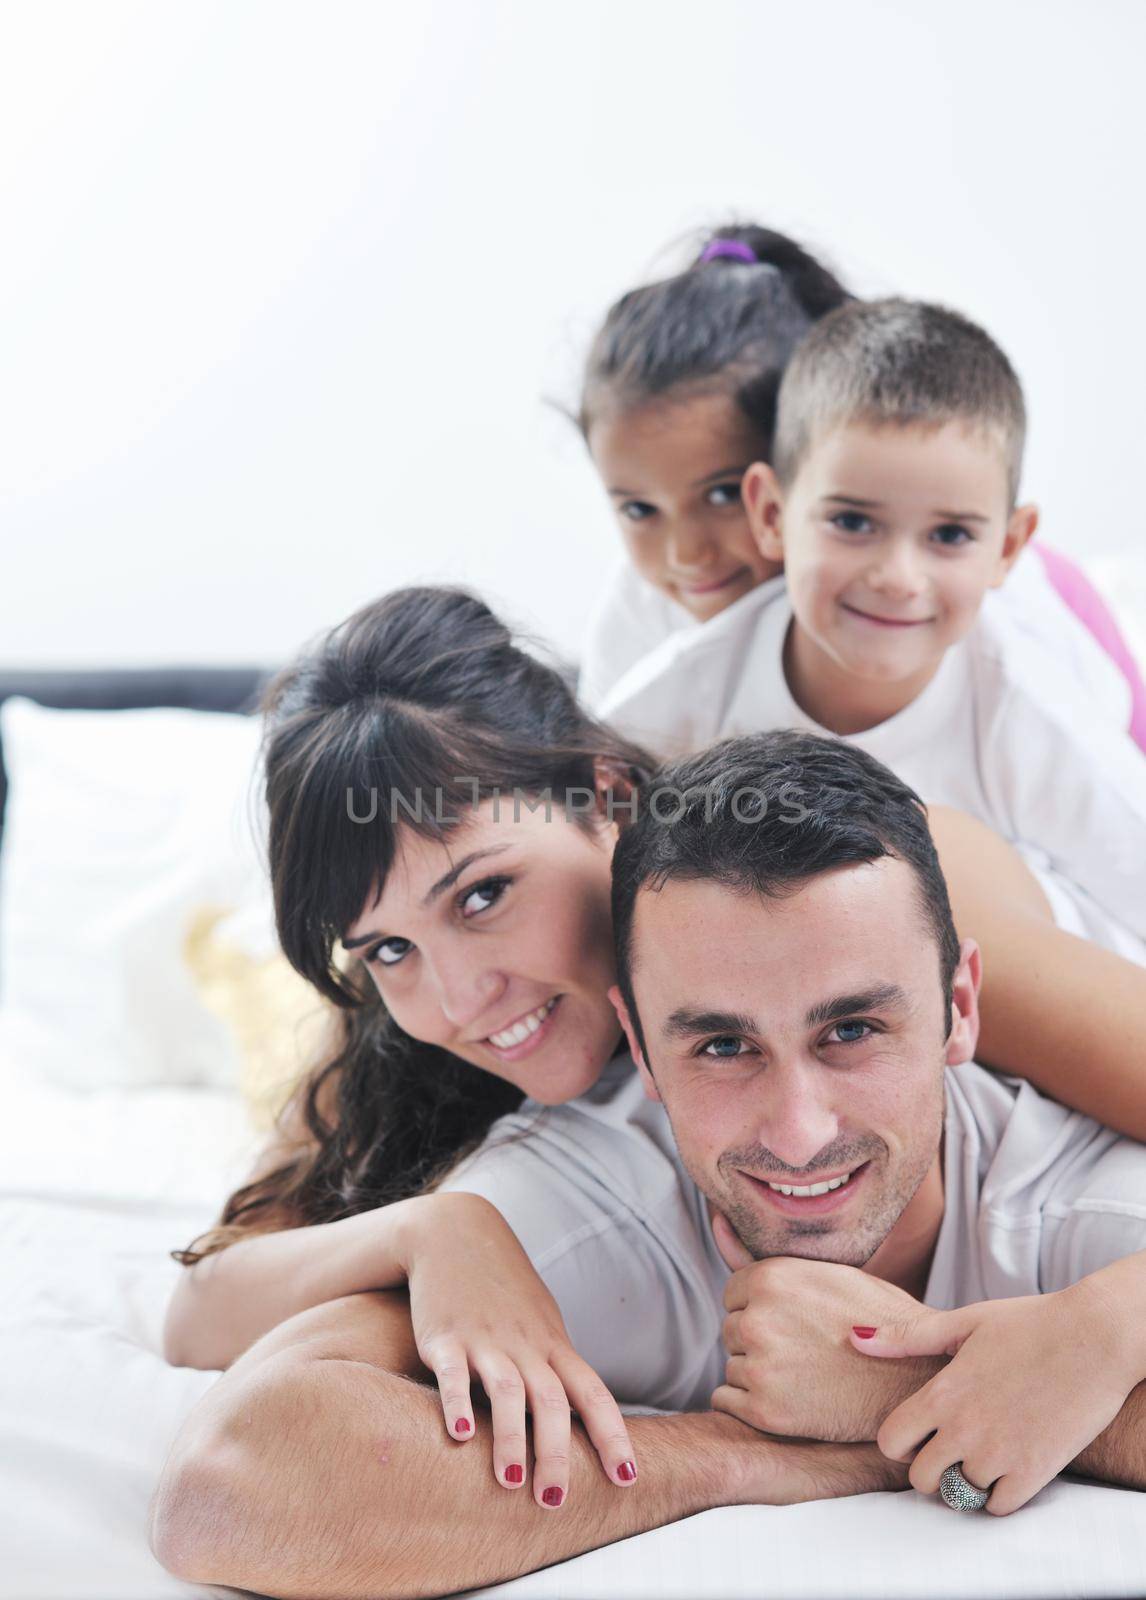 happy young Family in their bedroom have fun and play in bed